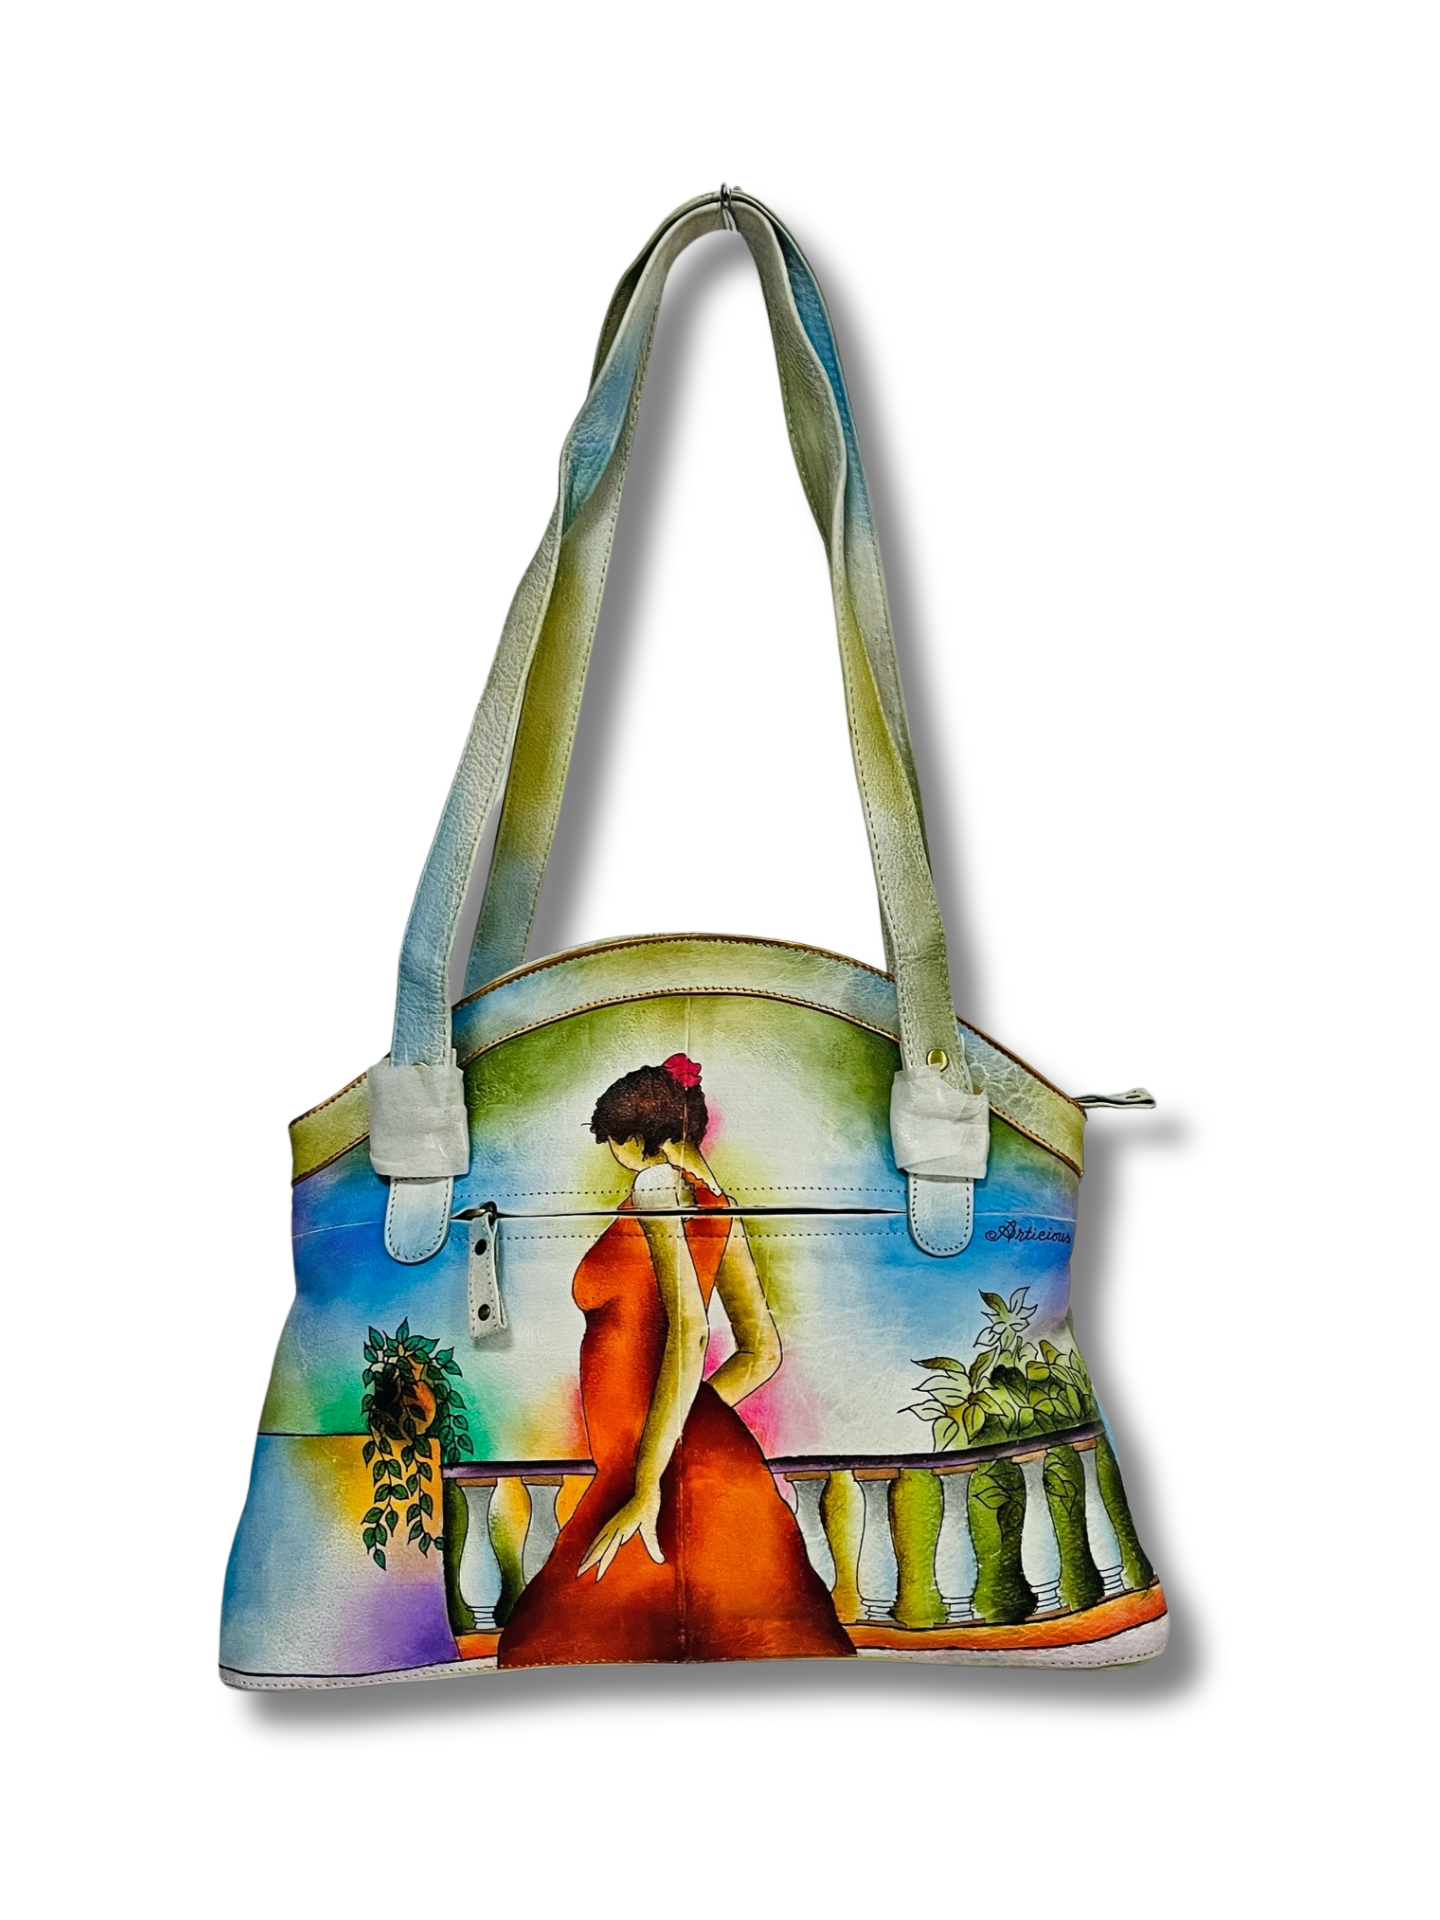 Aspire hand-painted leather bag